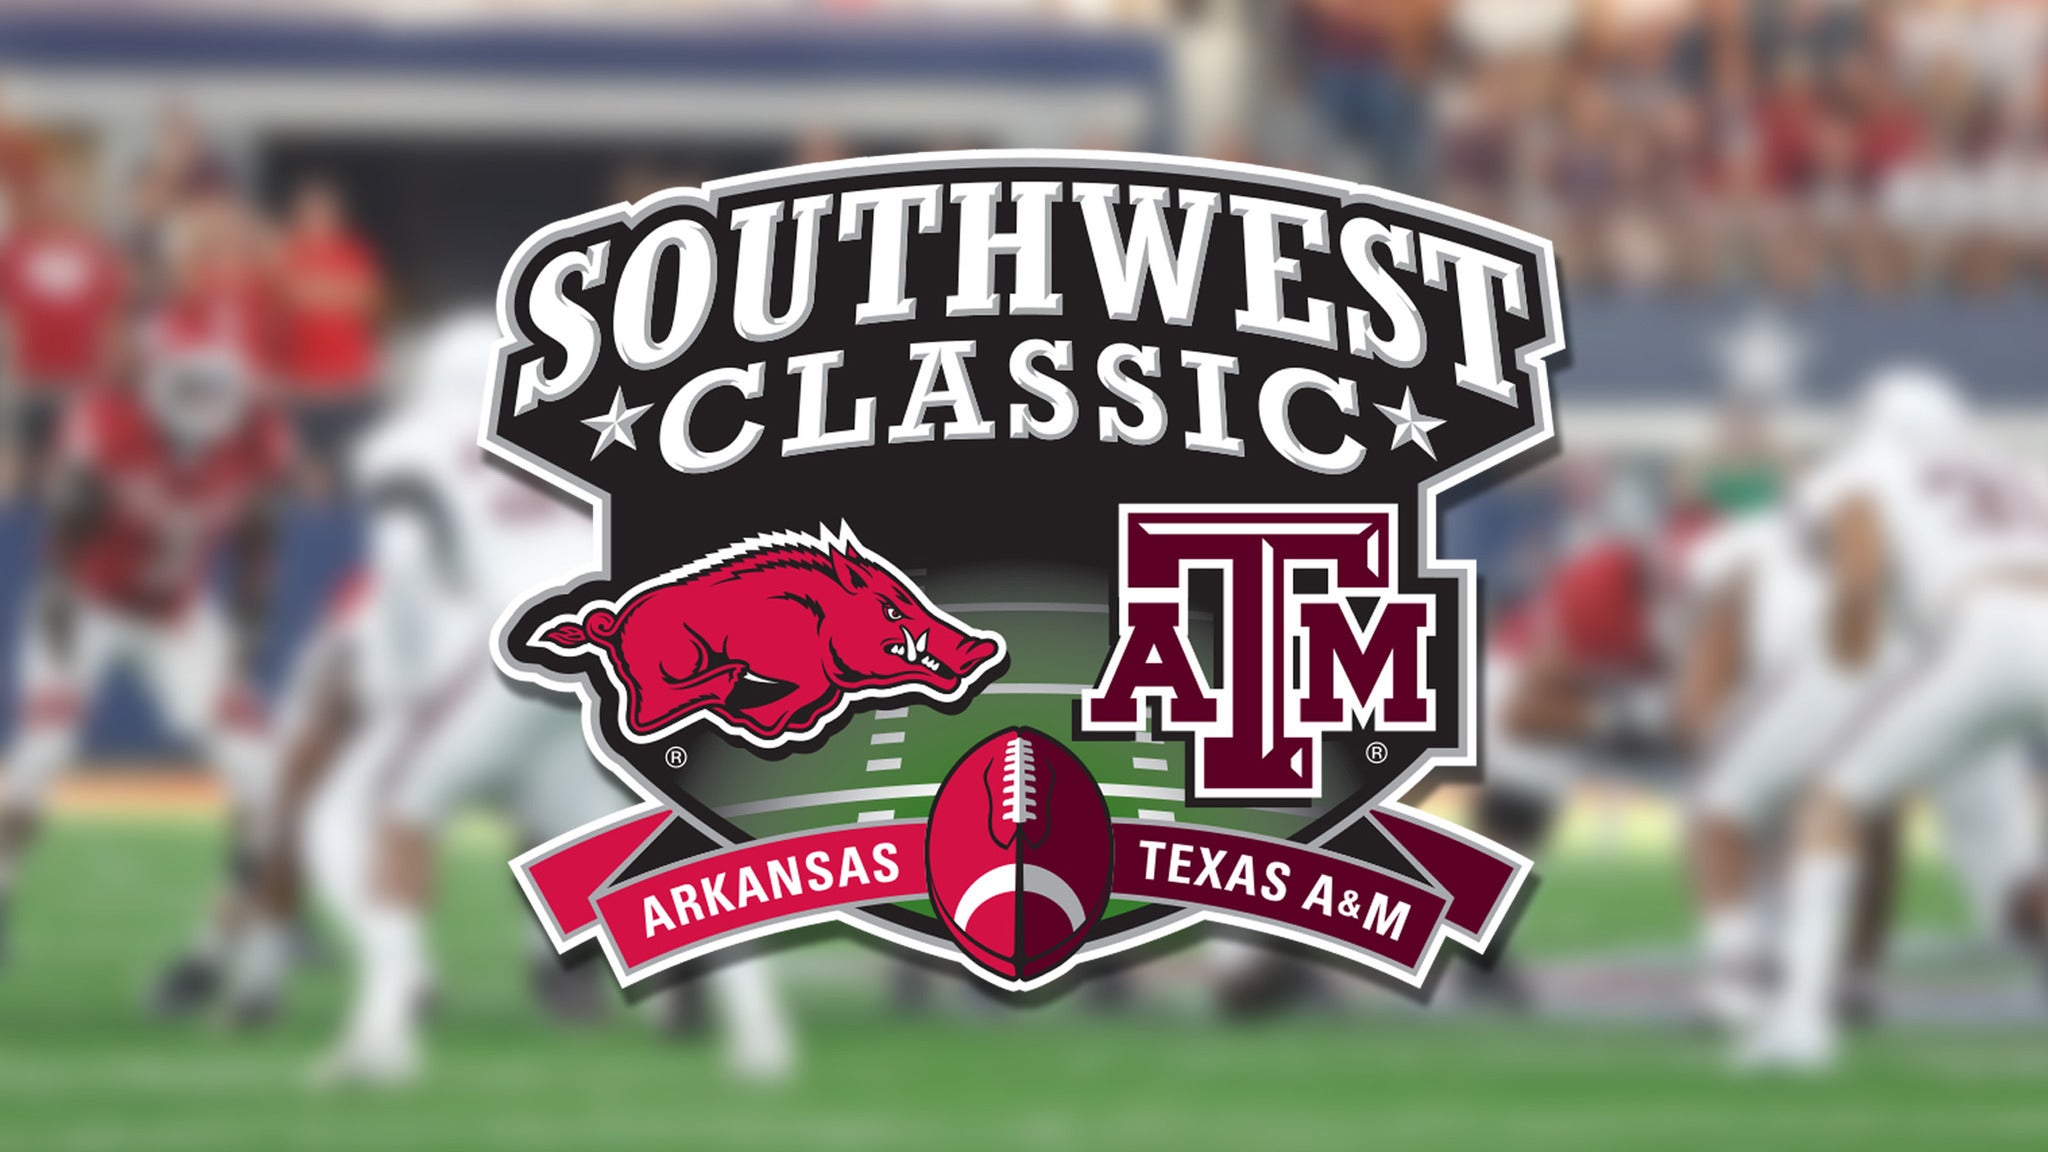 Southwest Classic Tickets Single Game Tickets & Schedule